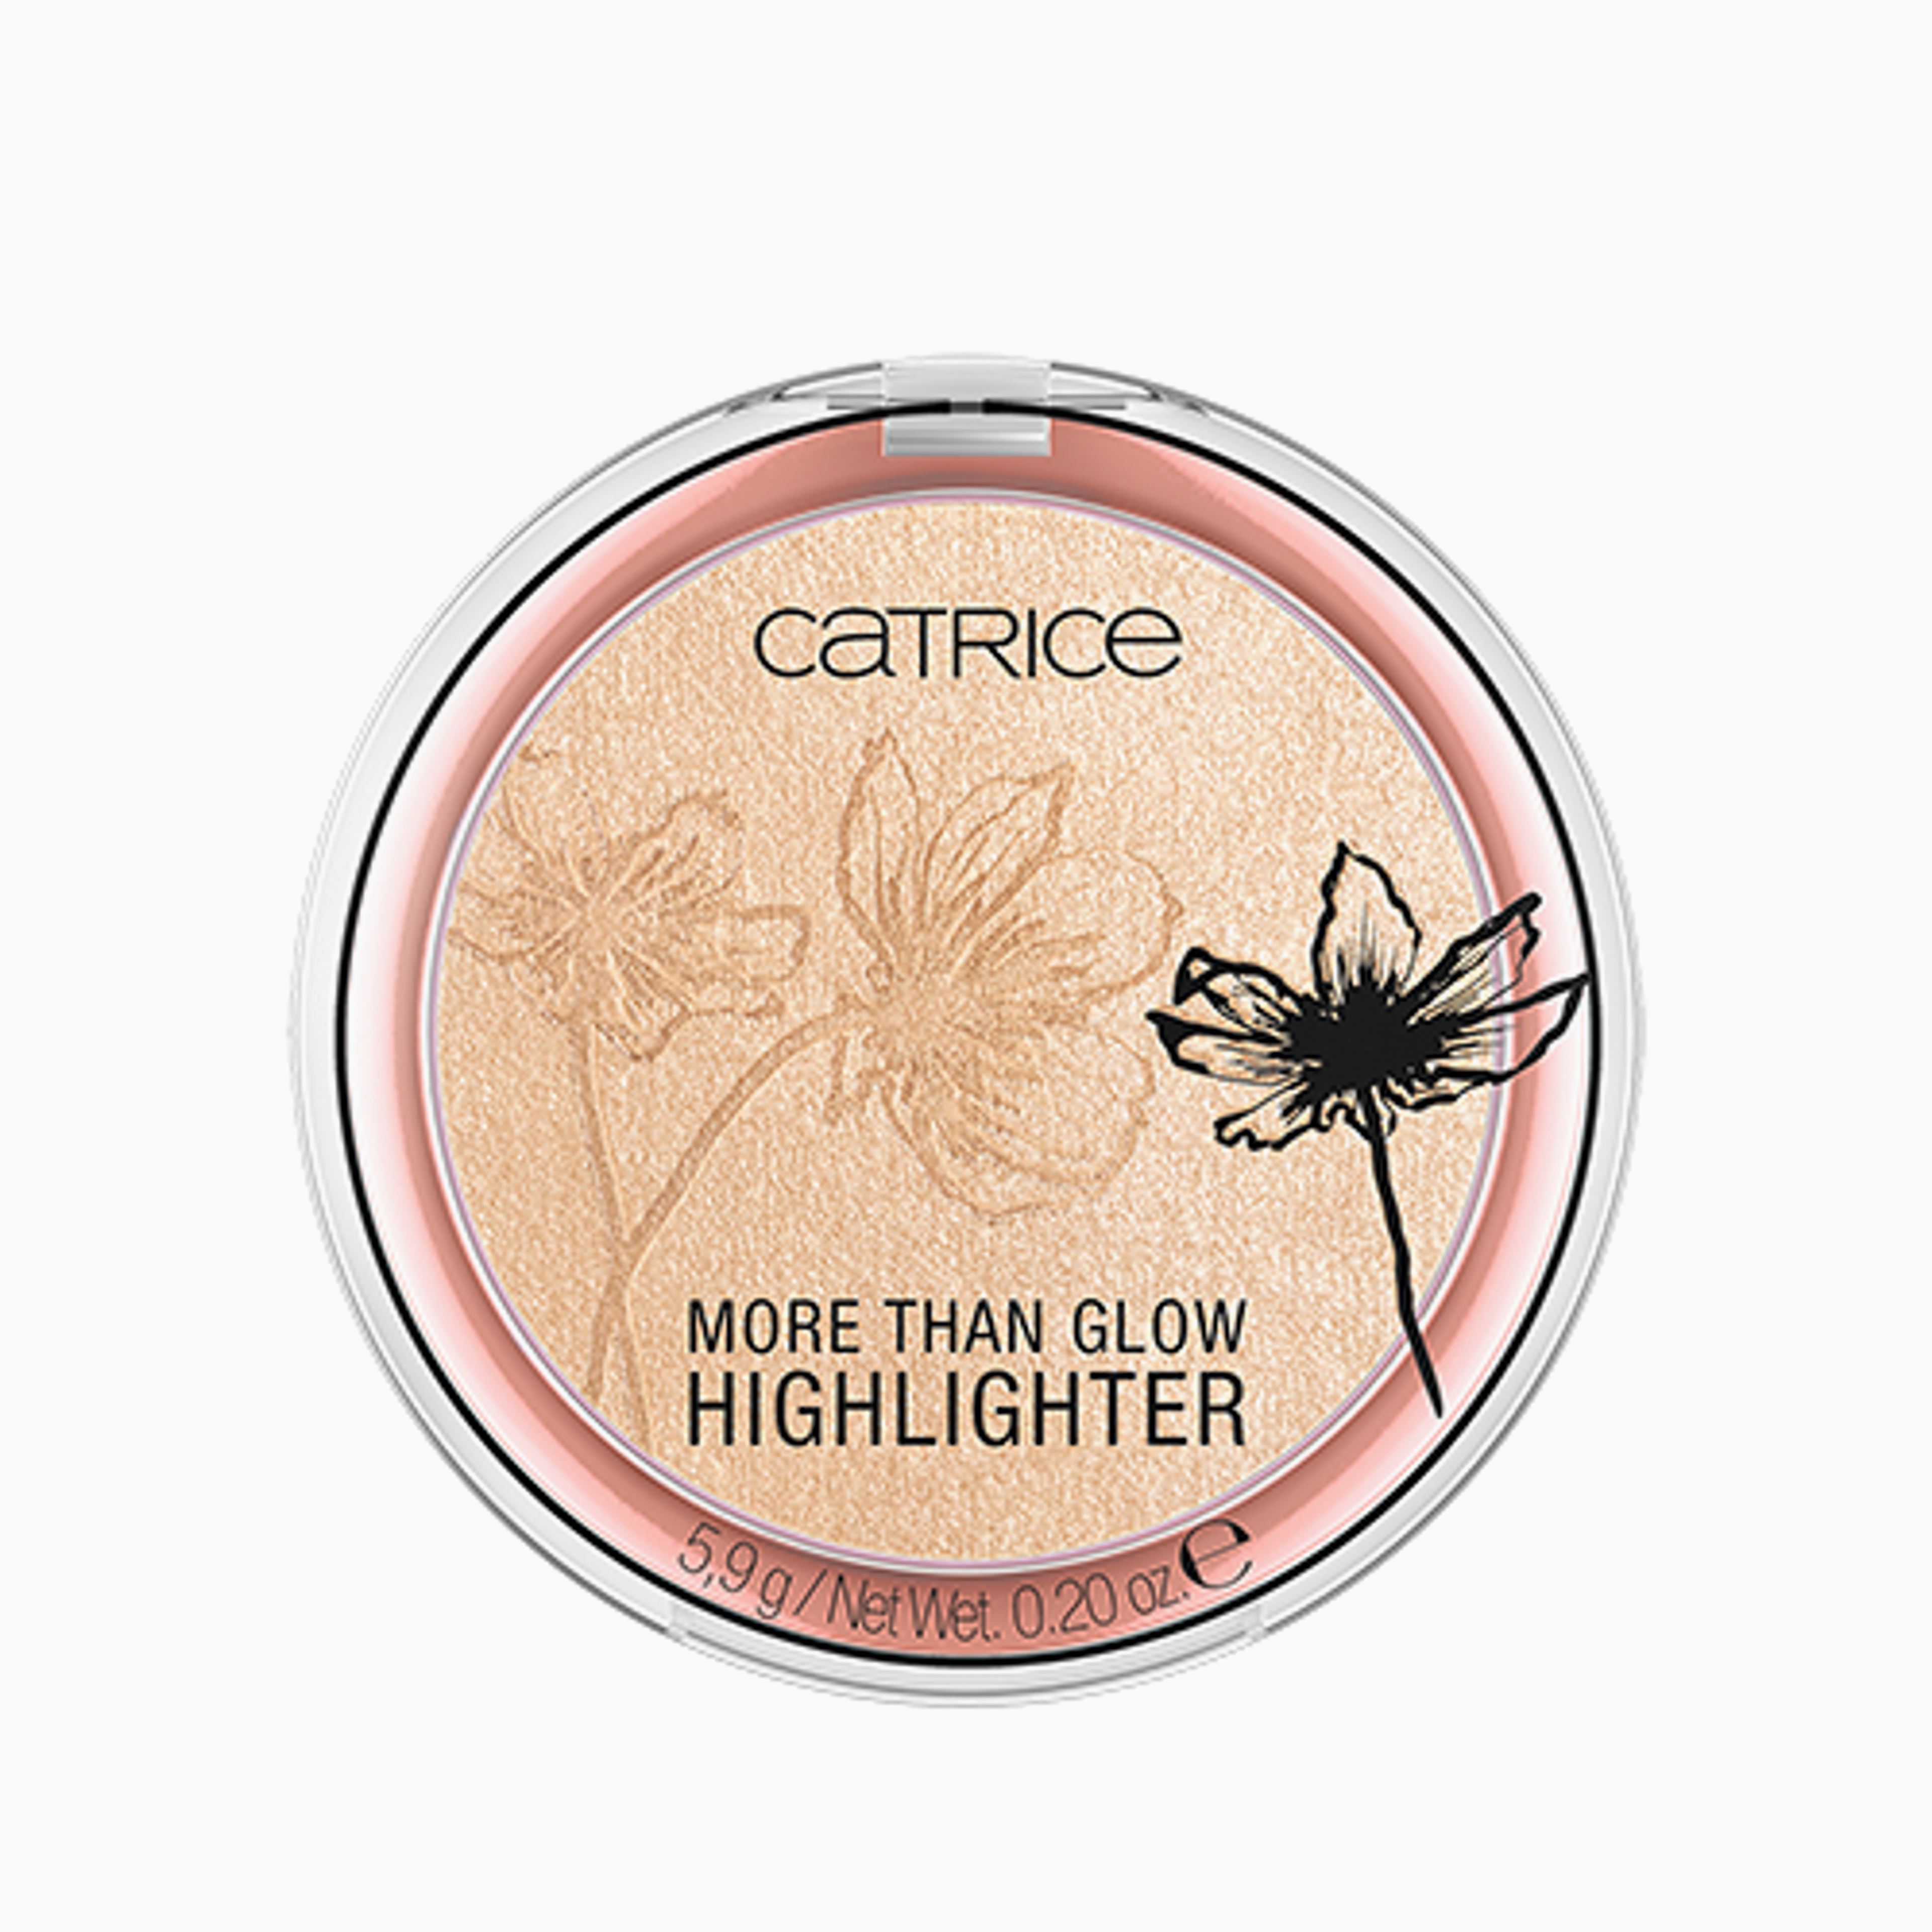 More than Glow Highlighter